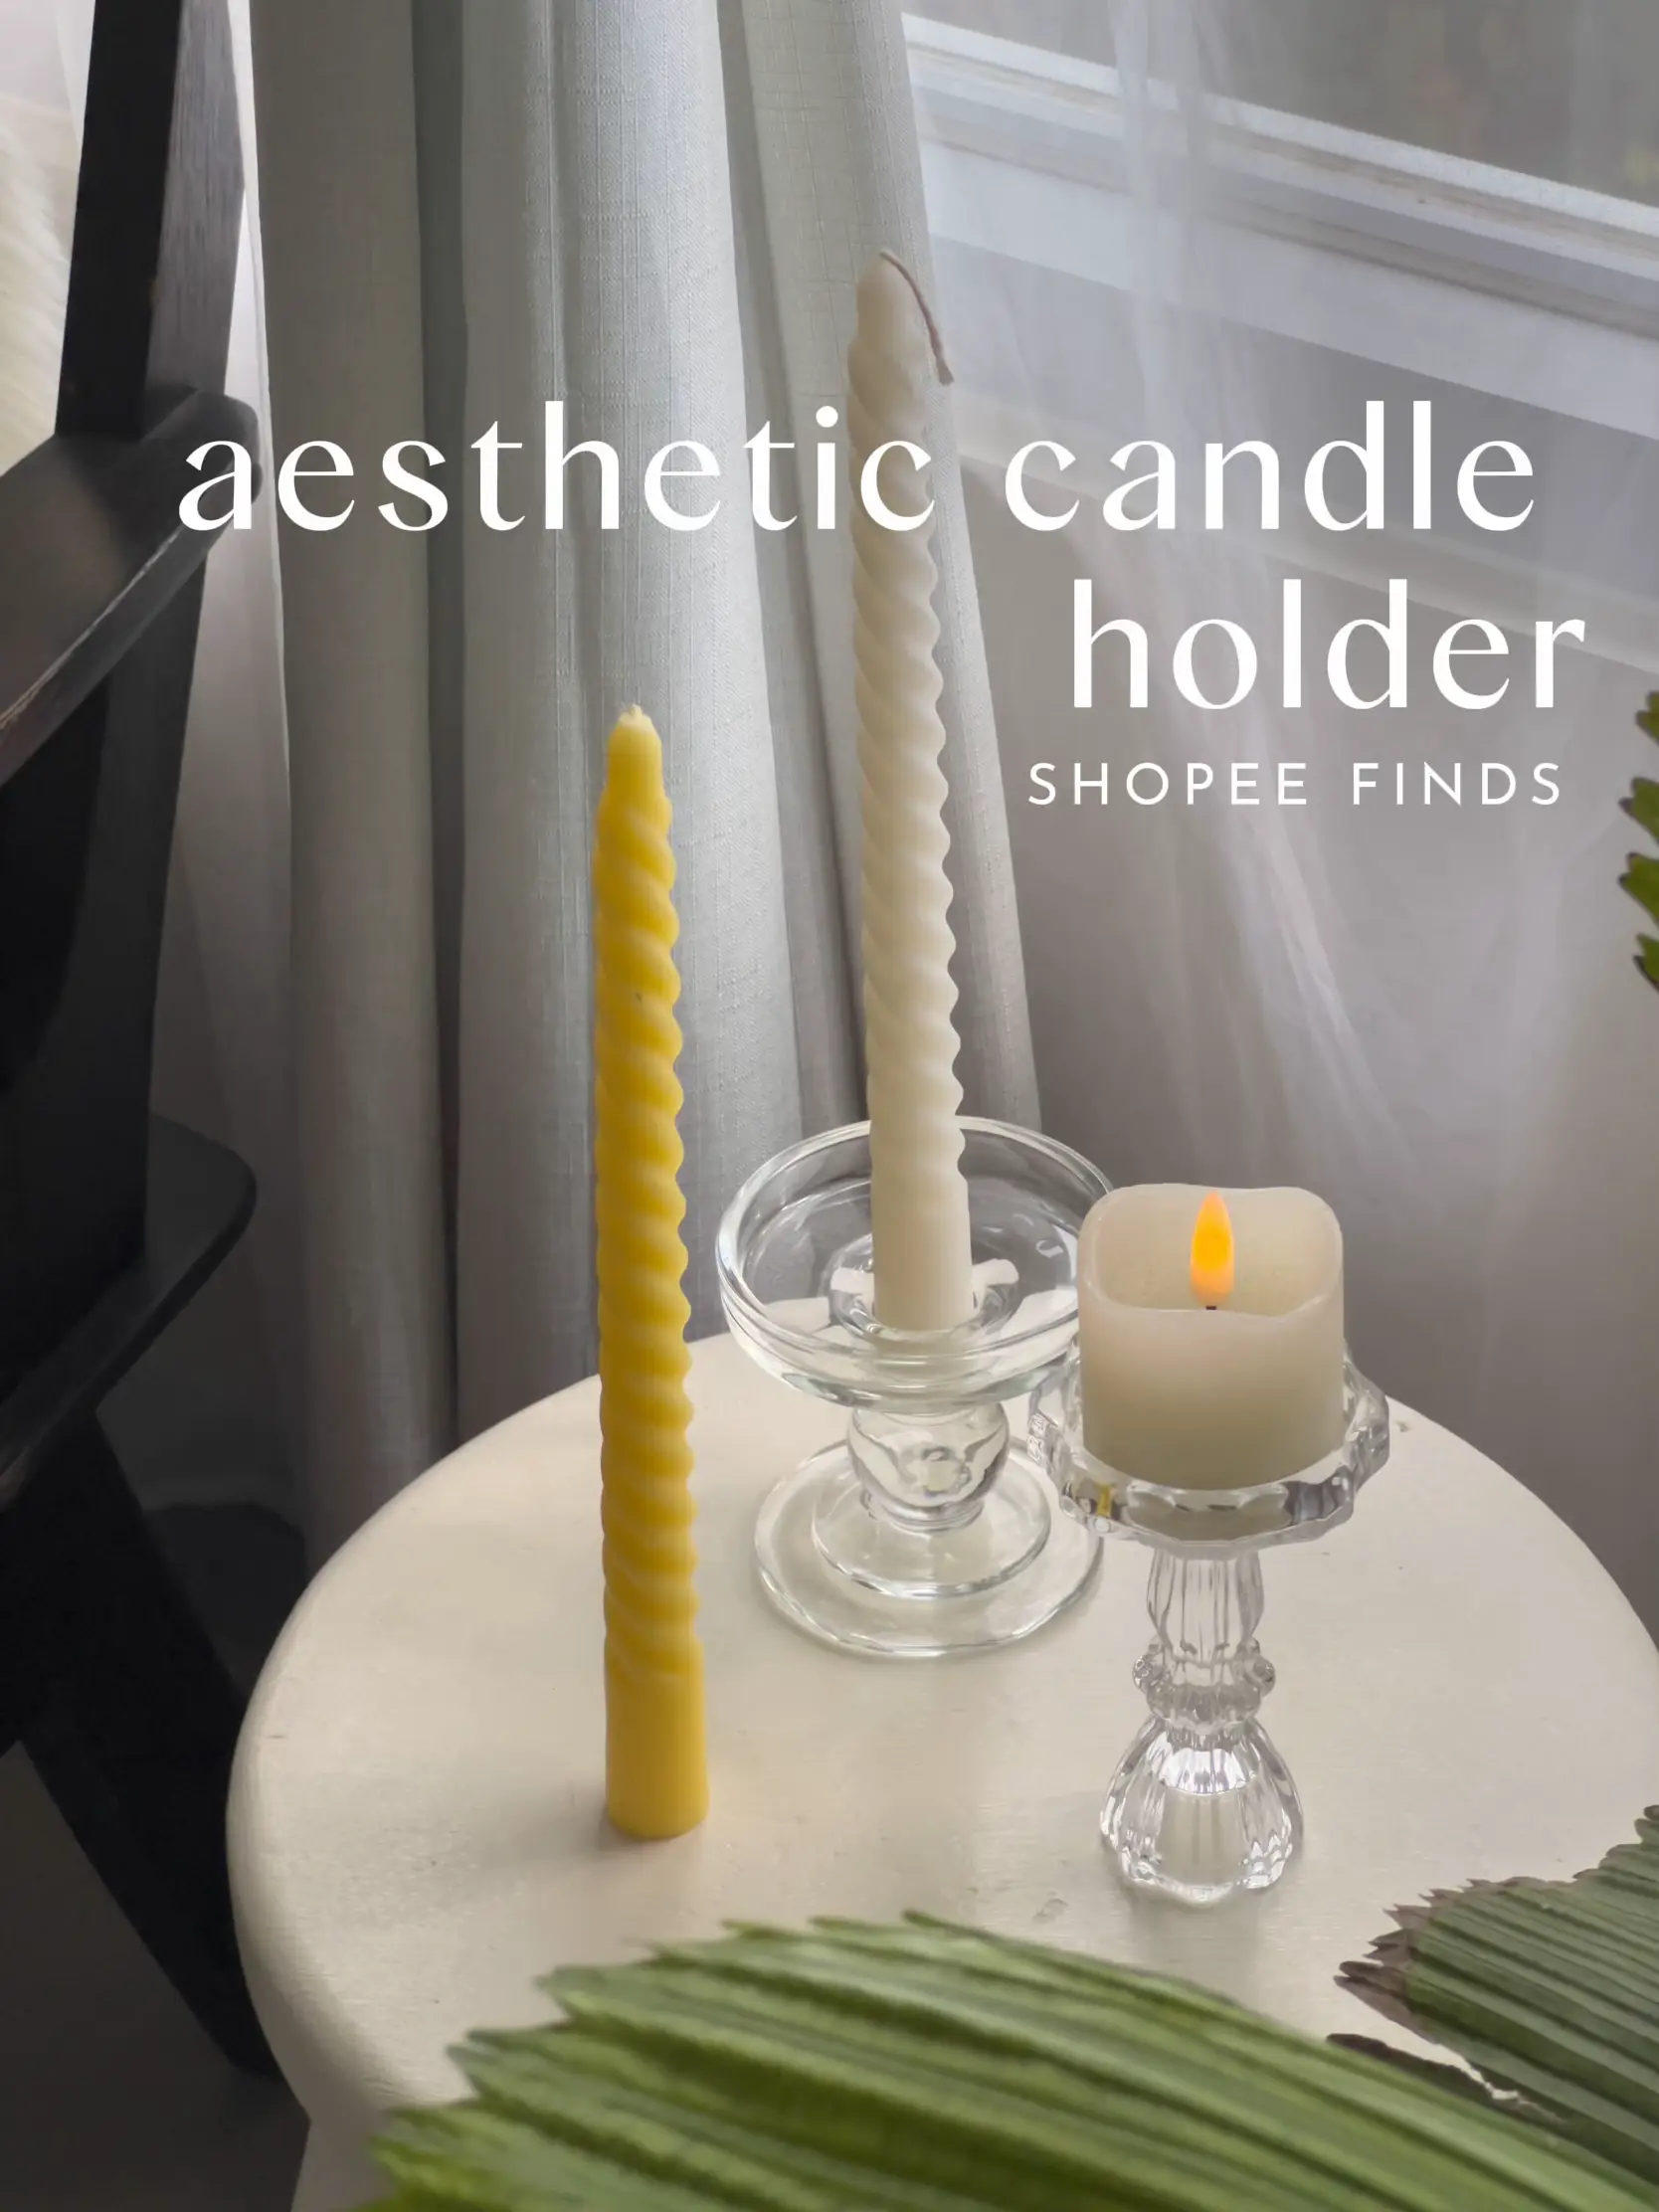 How to Make a Candle Stick Holder Bud Vase, H. Prall